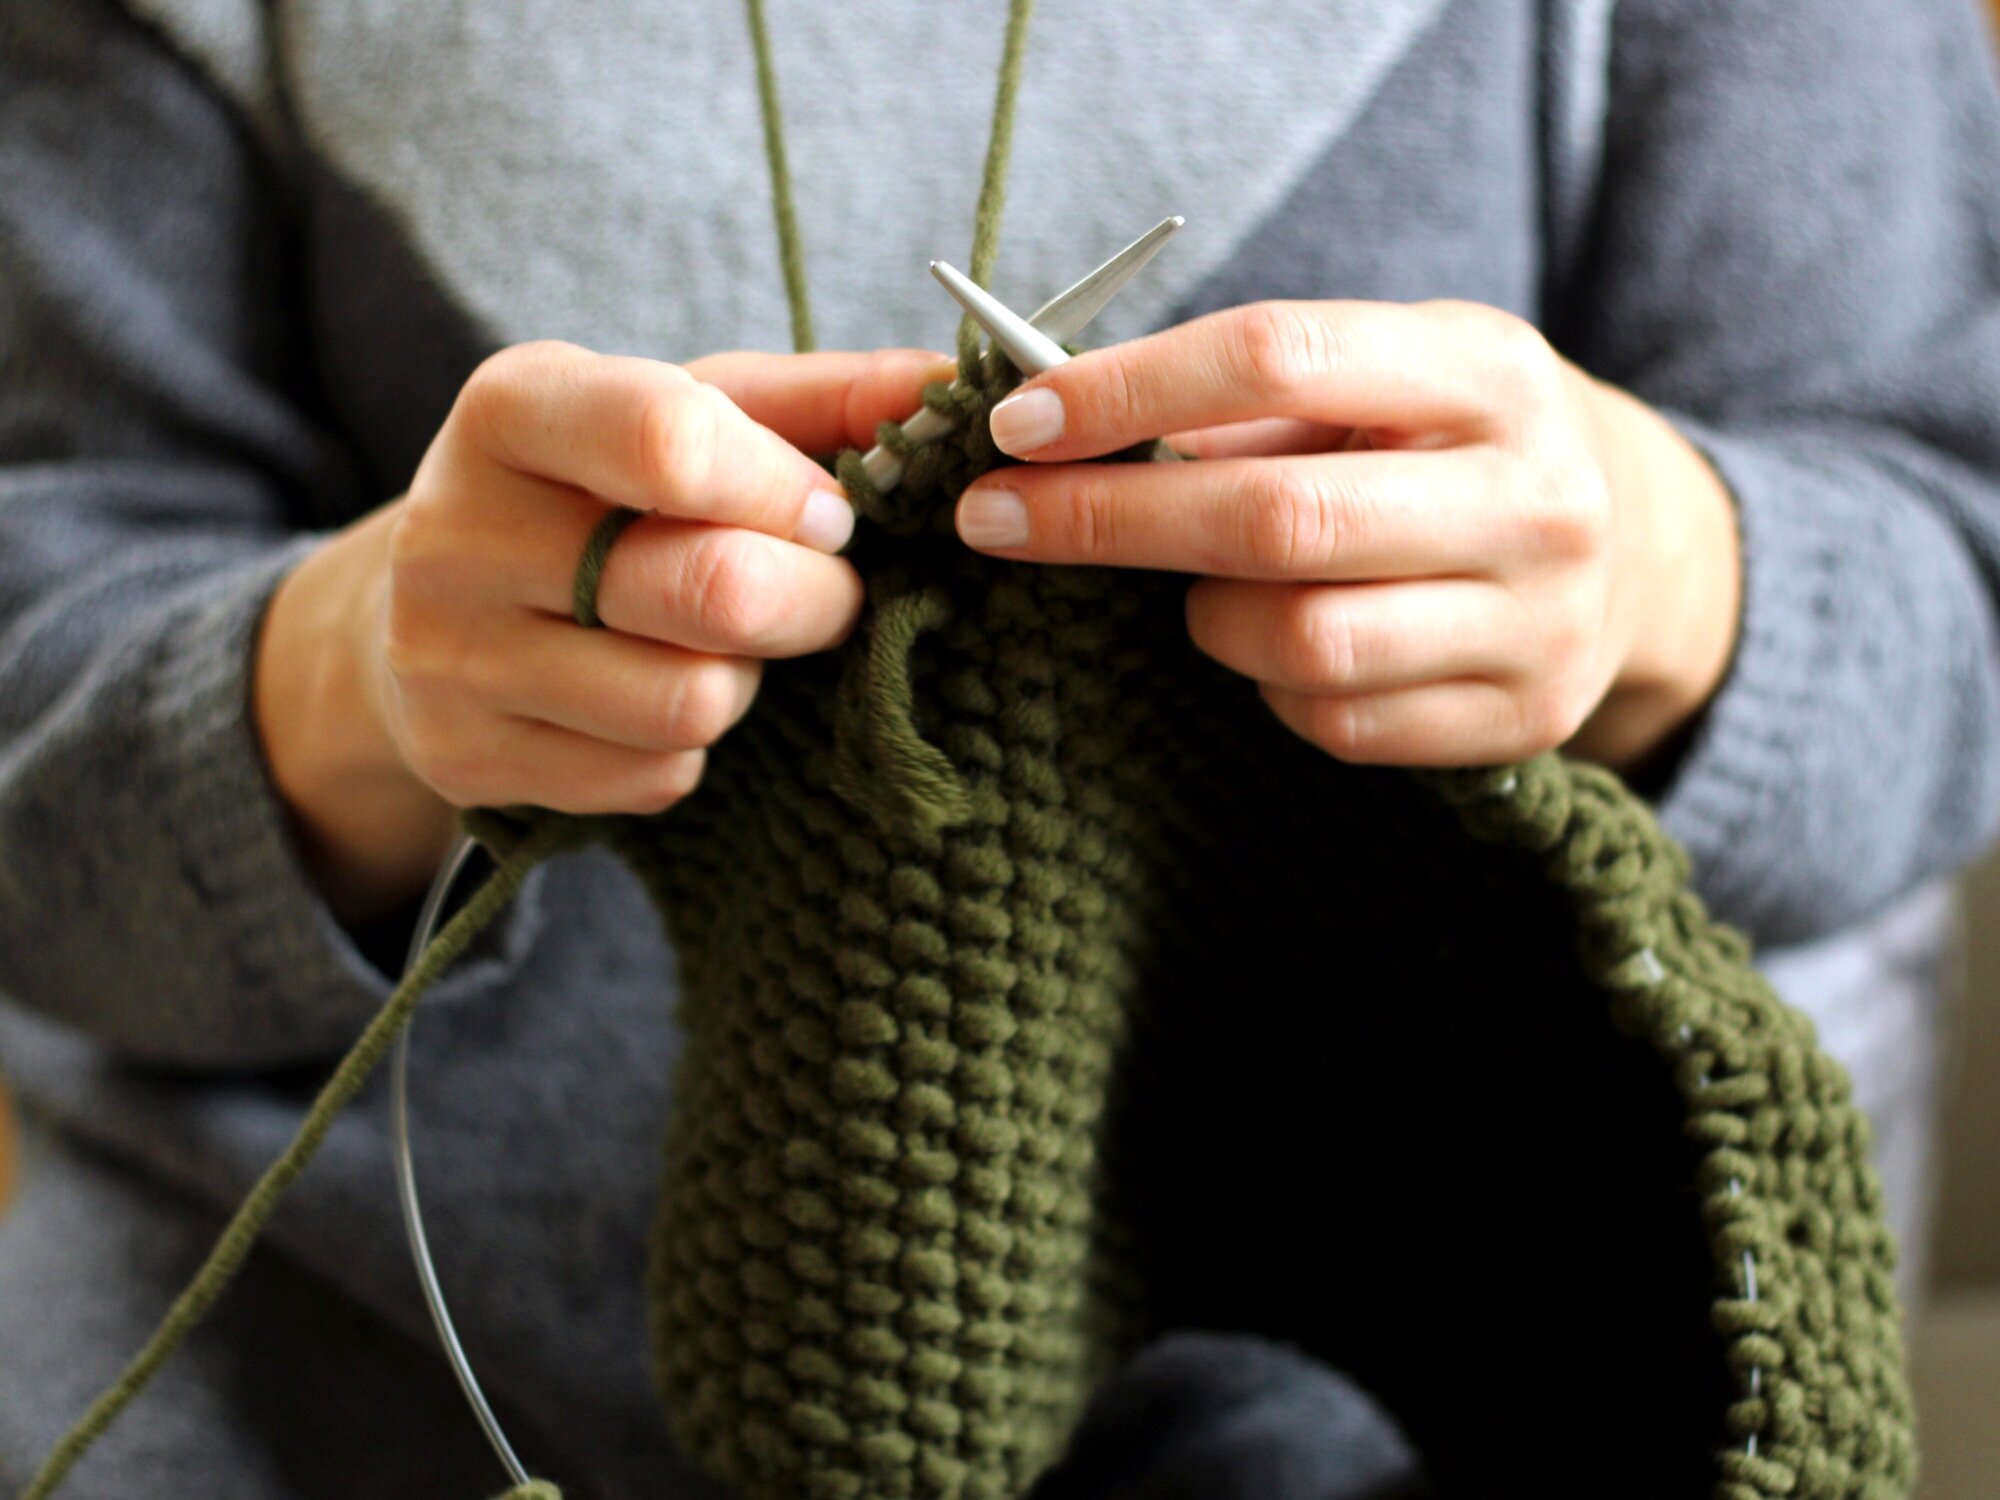 knitting with needles